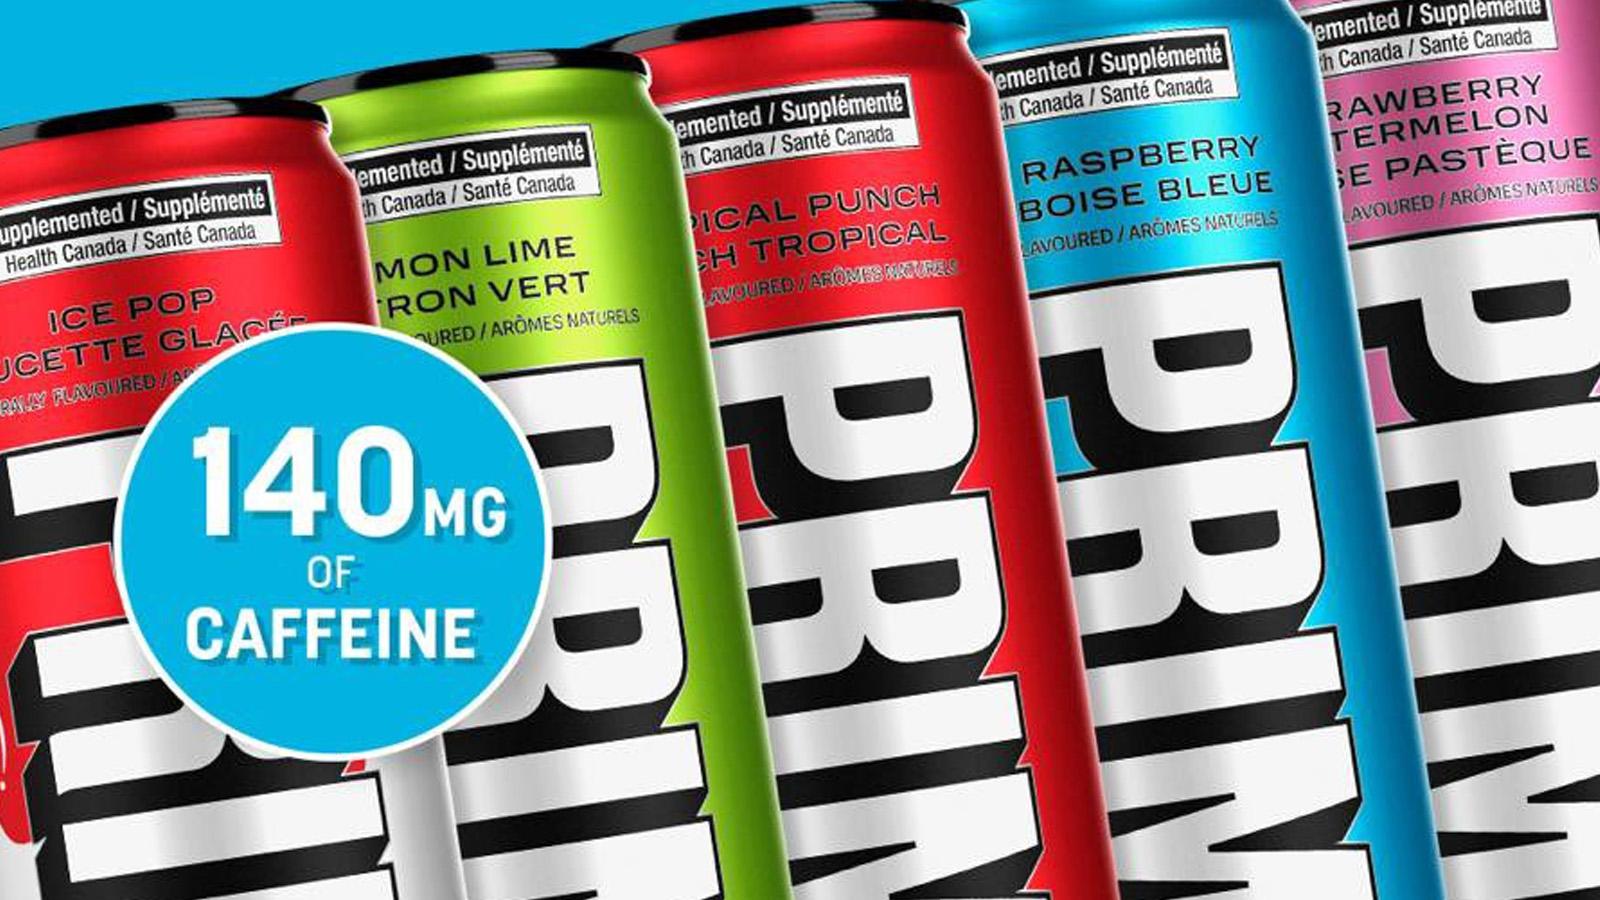 Prime Energy cans in Canada despite recent recall